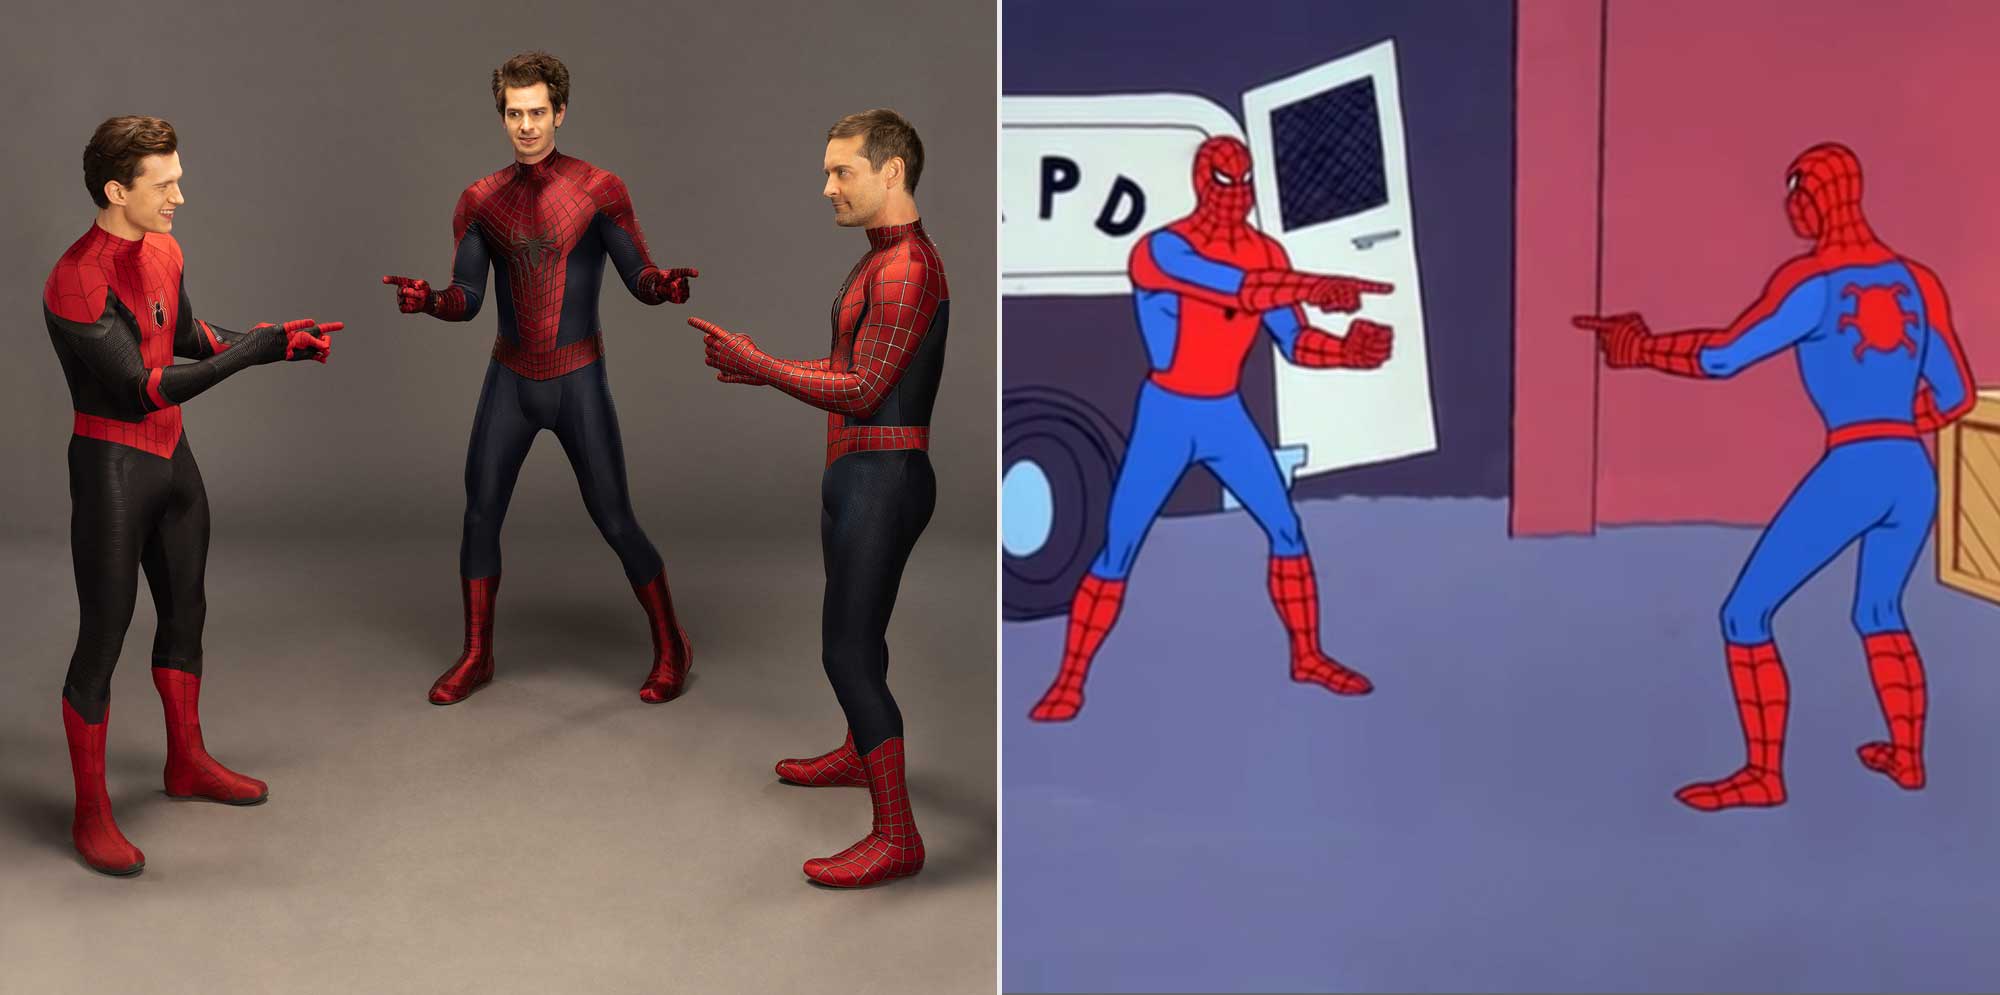 Tom Holland, Andrew Garfield, and Tobey Maguire recreate classic Spider-Man pointing meme